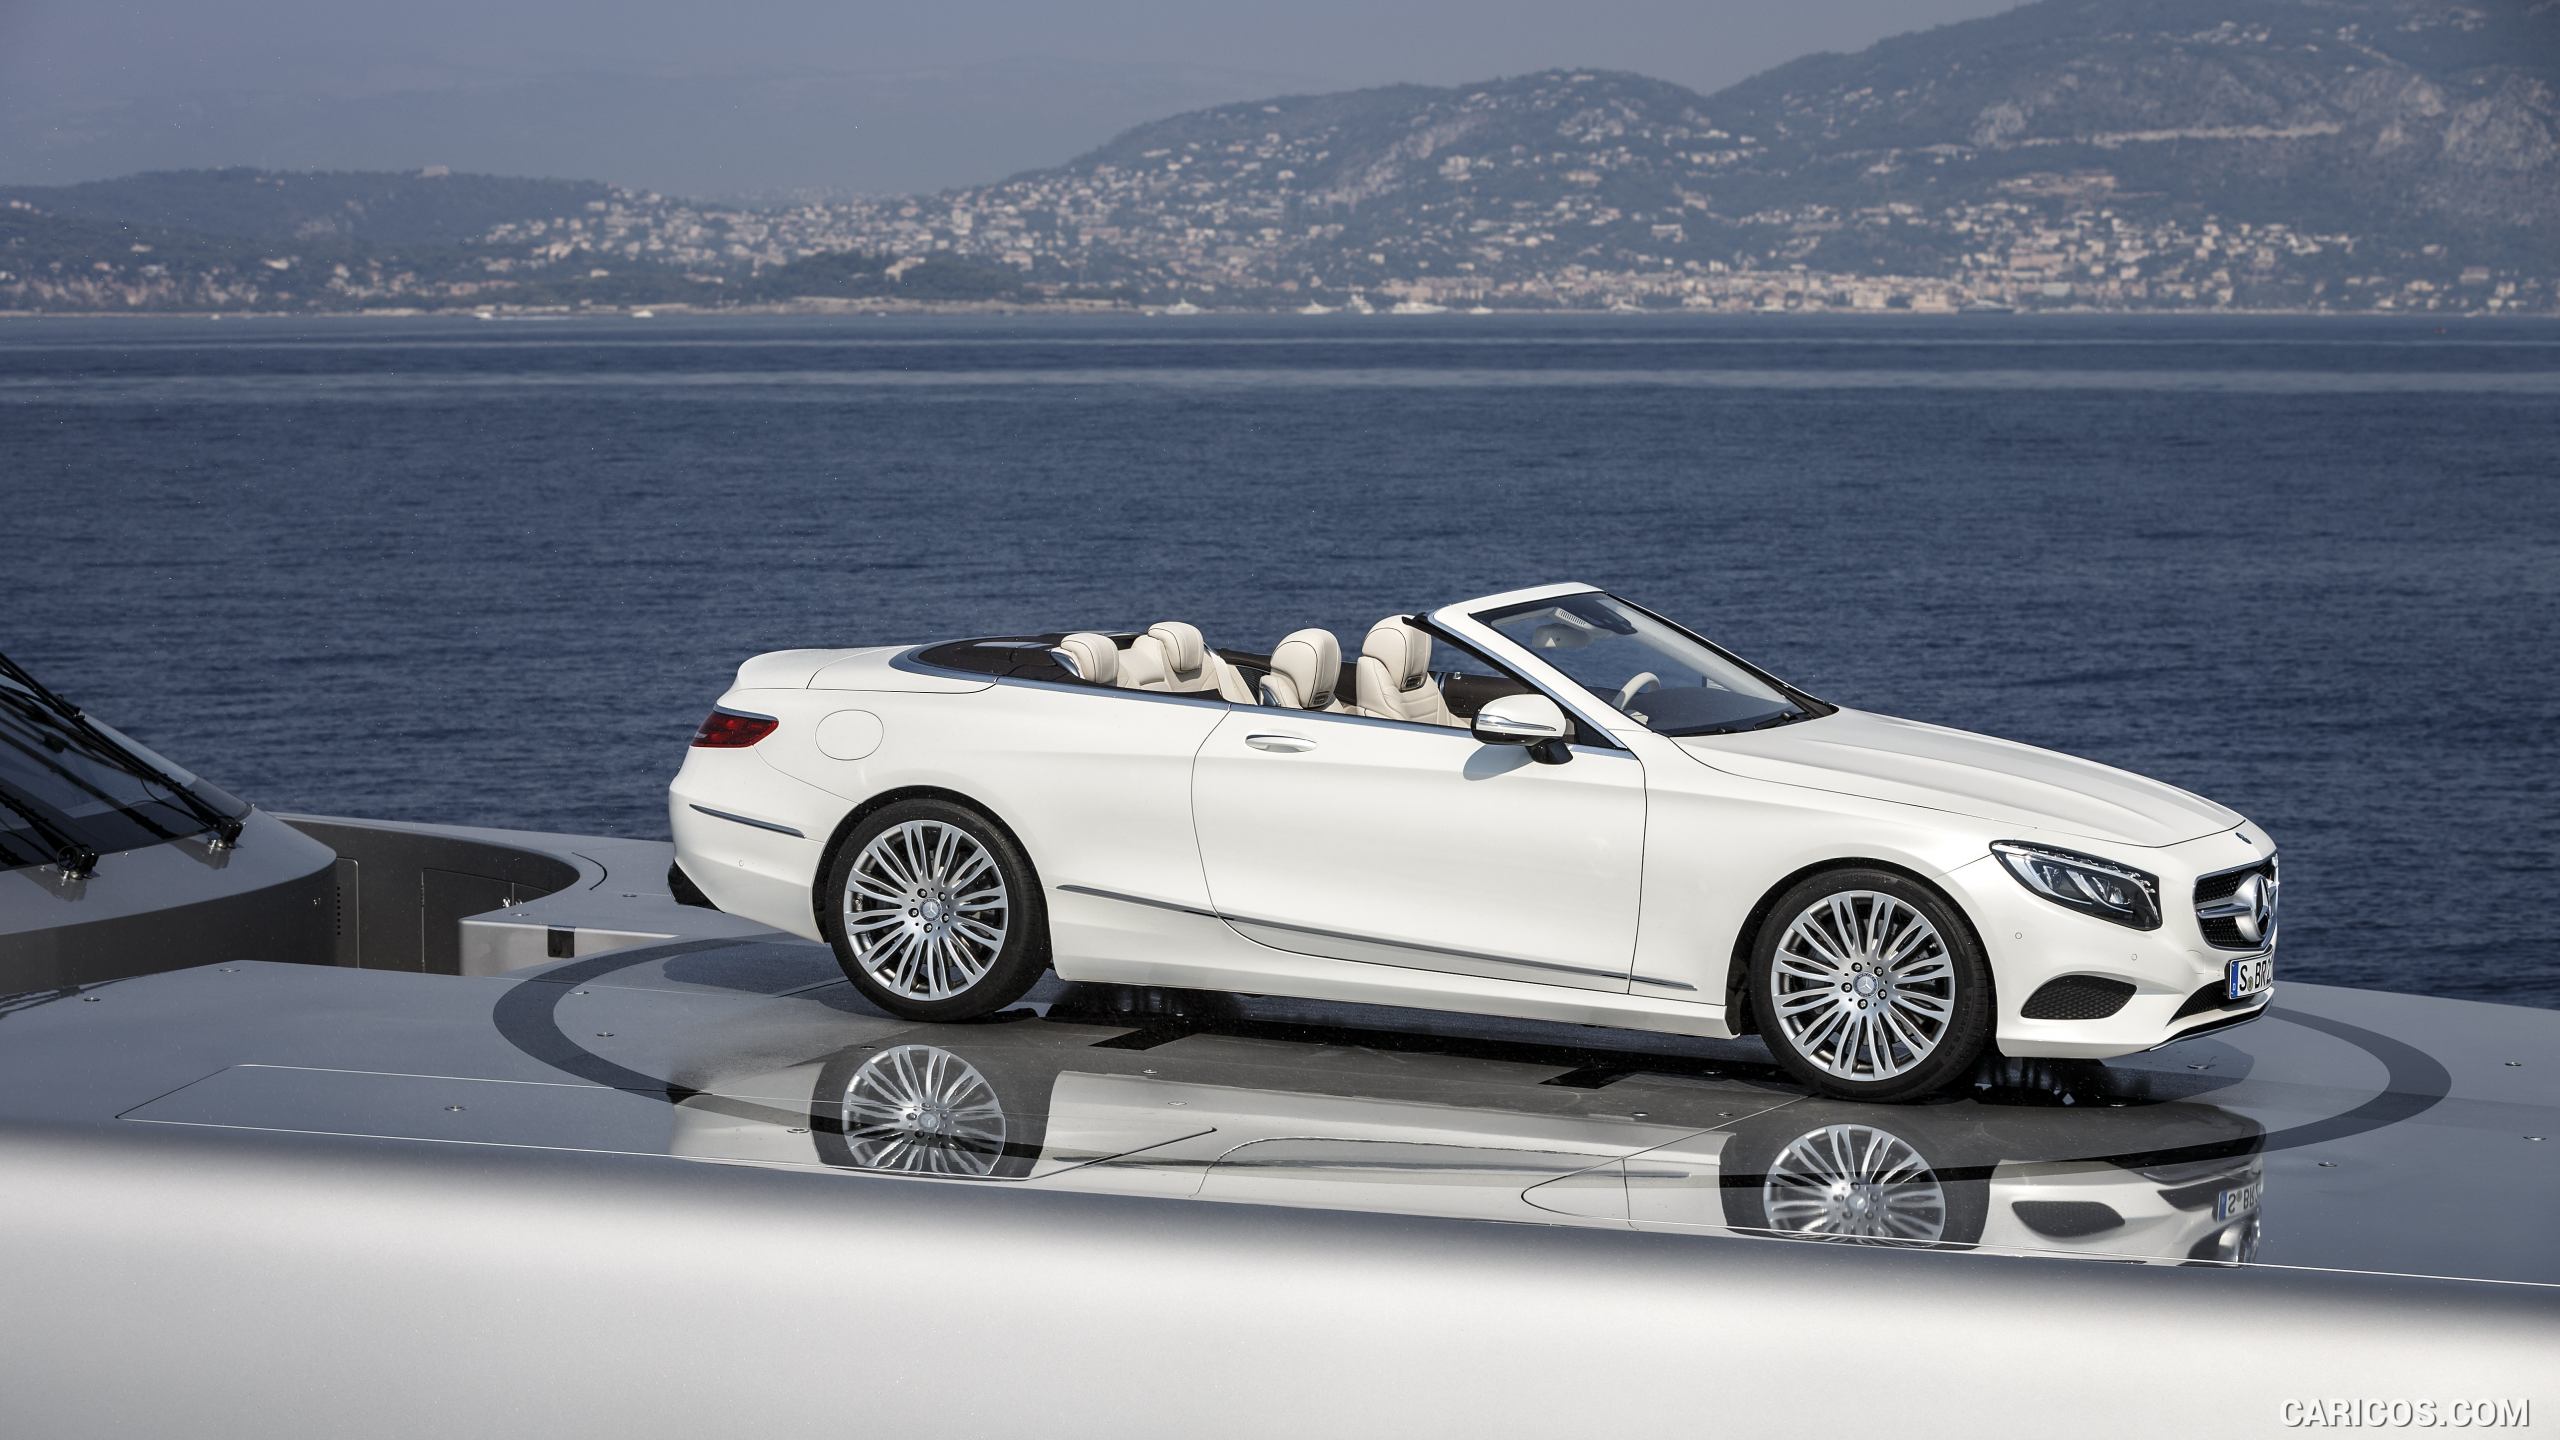 2017 Mercedes-Benz S-Class S500 Cabriolet aboard Silver Fast Yacht - Side, #54 of 56